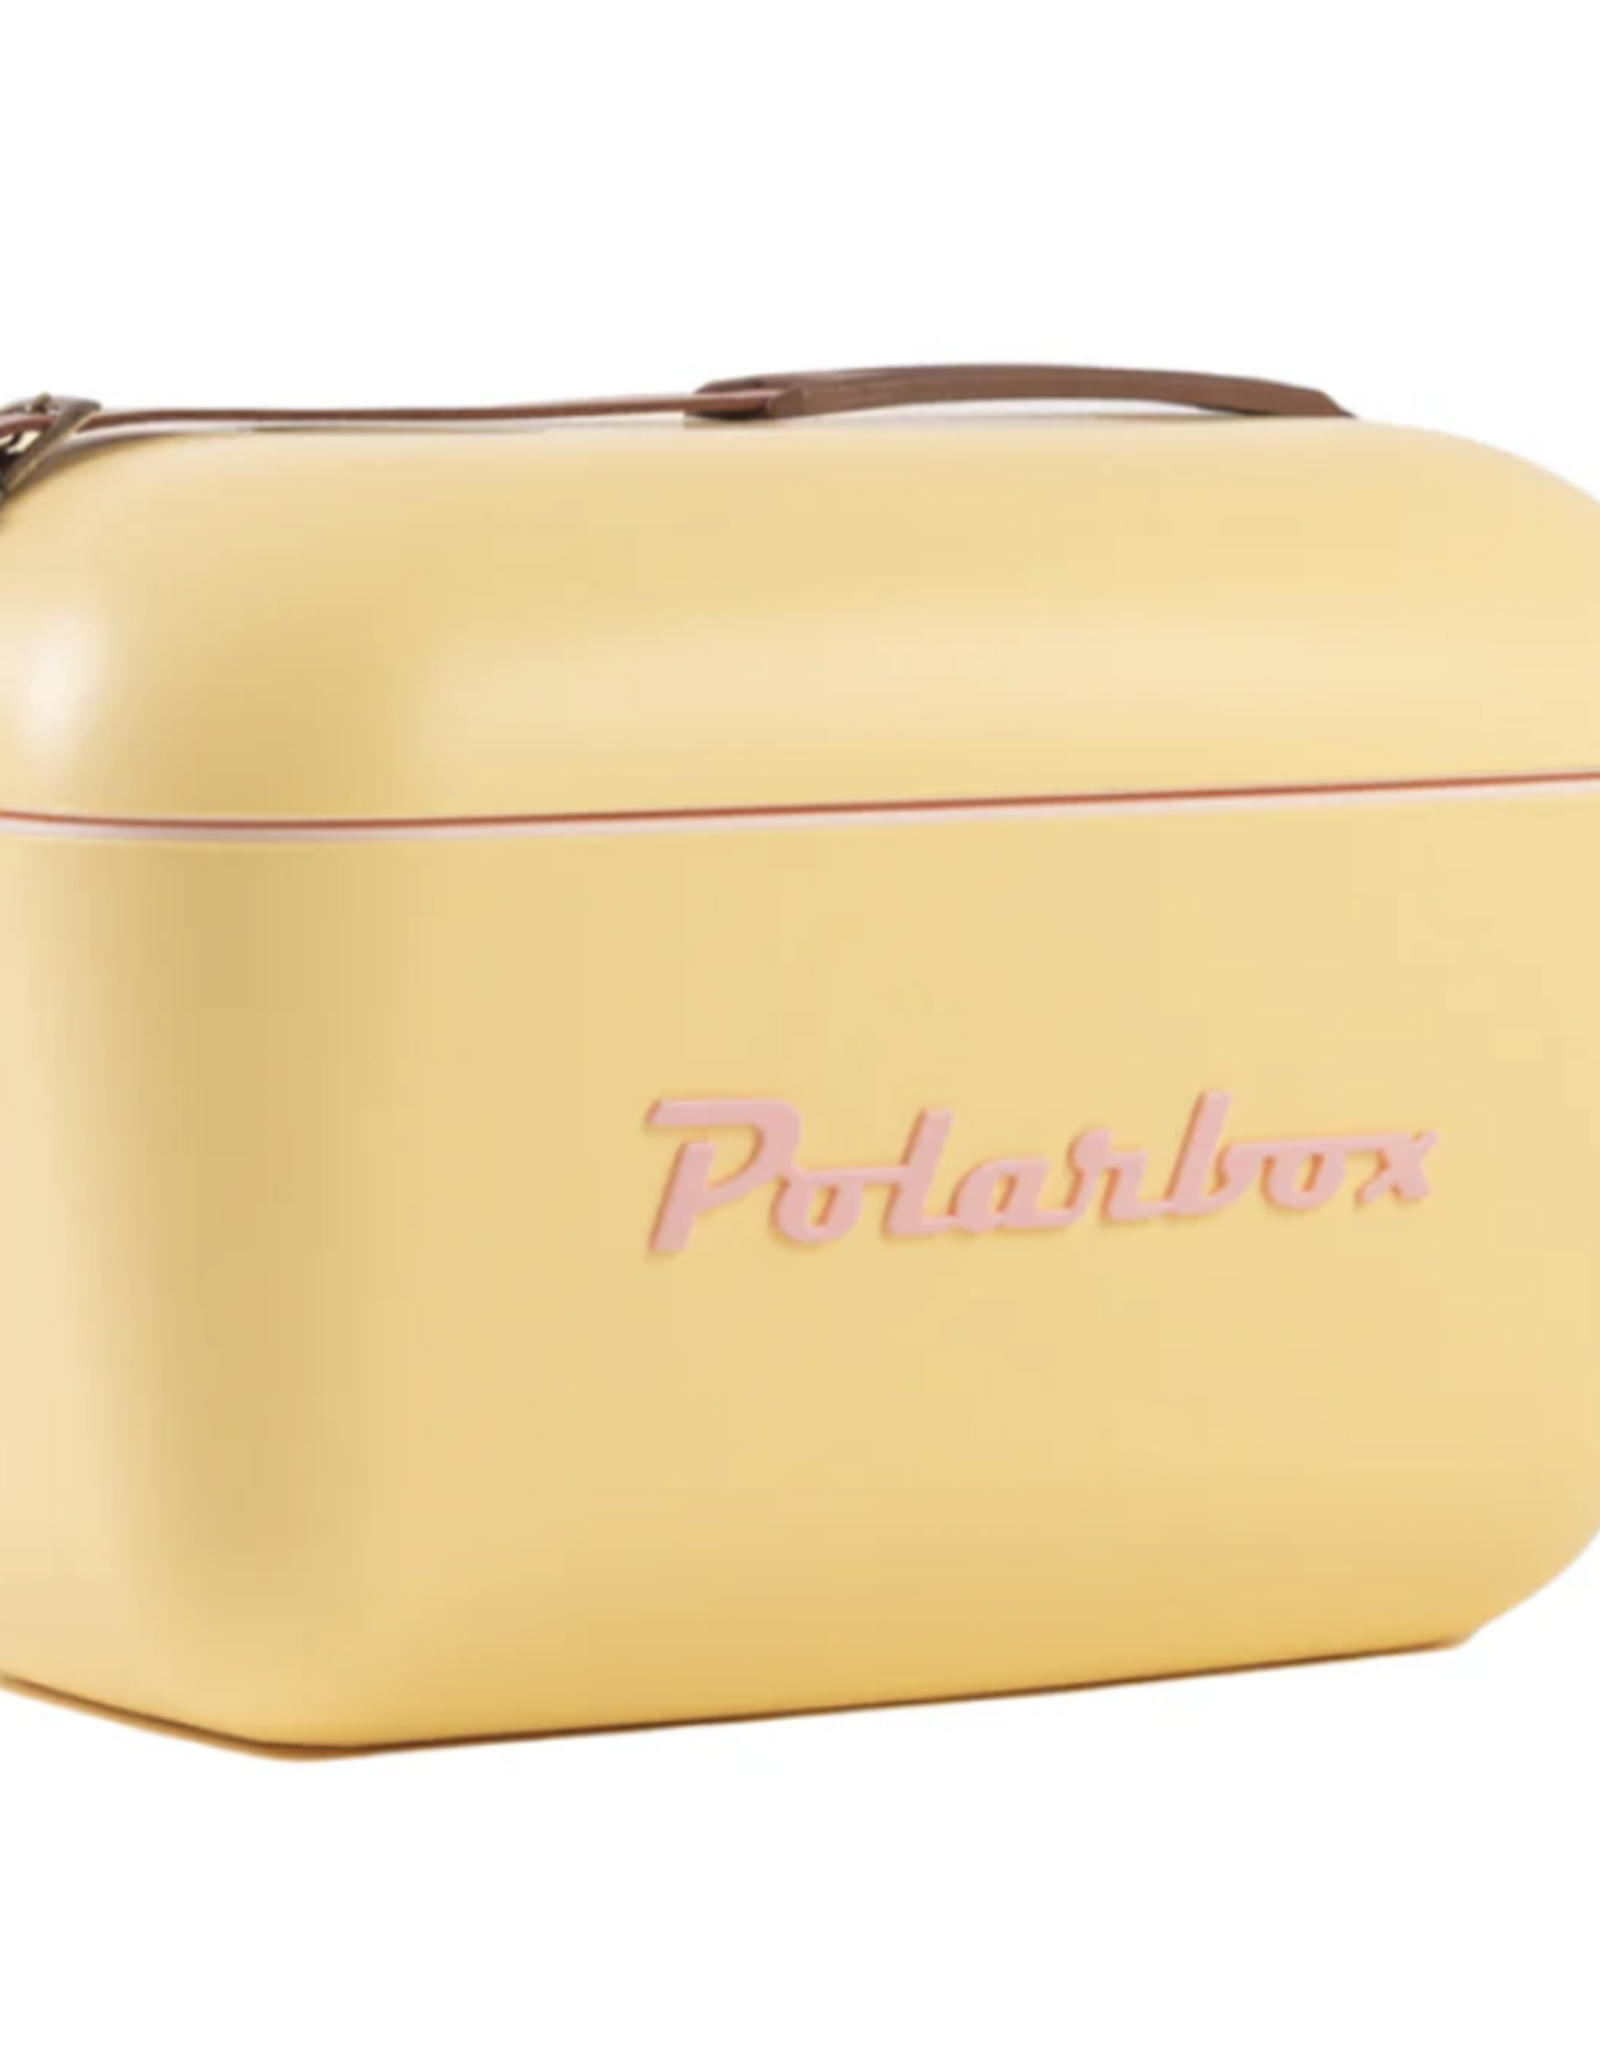 Polarbox Polarbox Retro Cooler 13Qt Yellow With Brown Strap